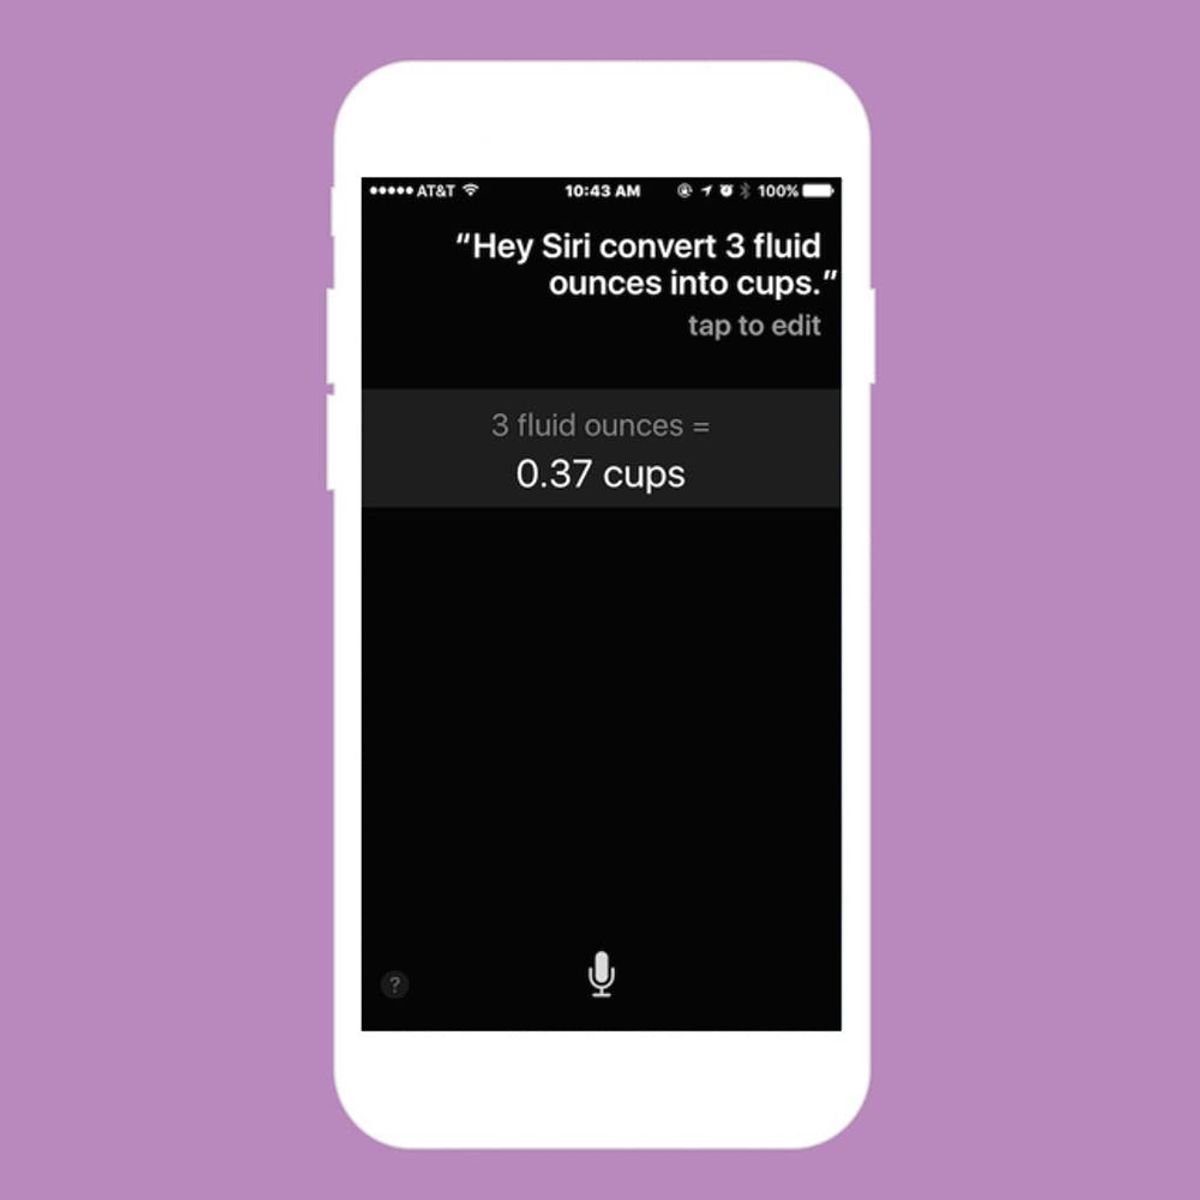 10 Badass Things You Didn’t Know You Could Do With Siri